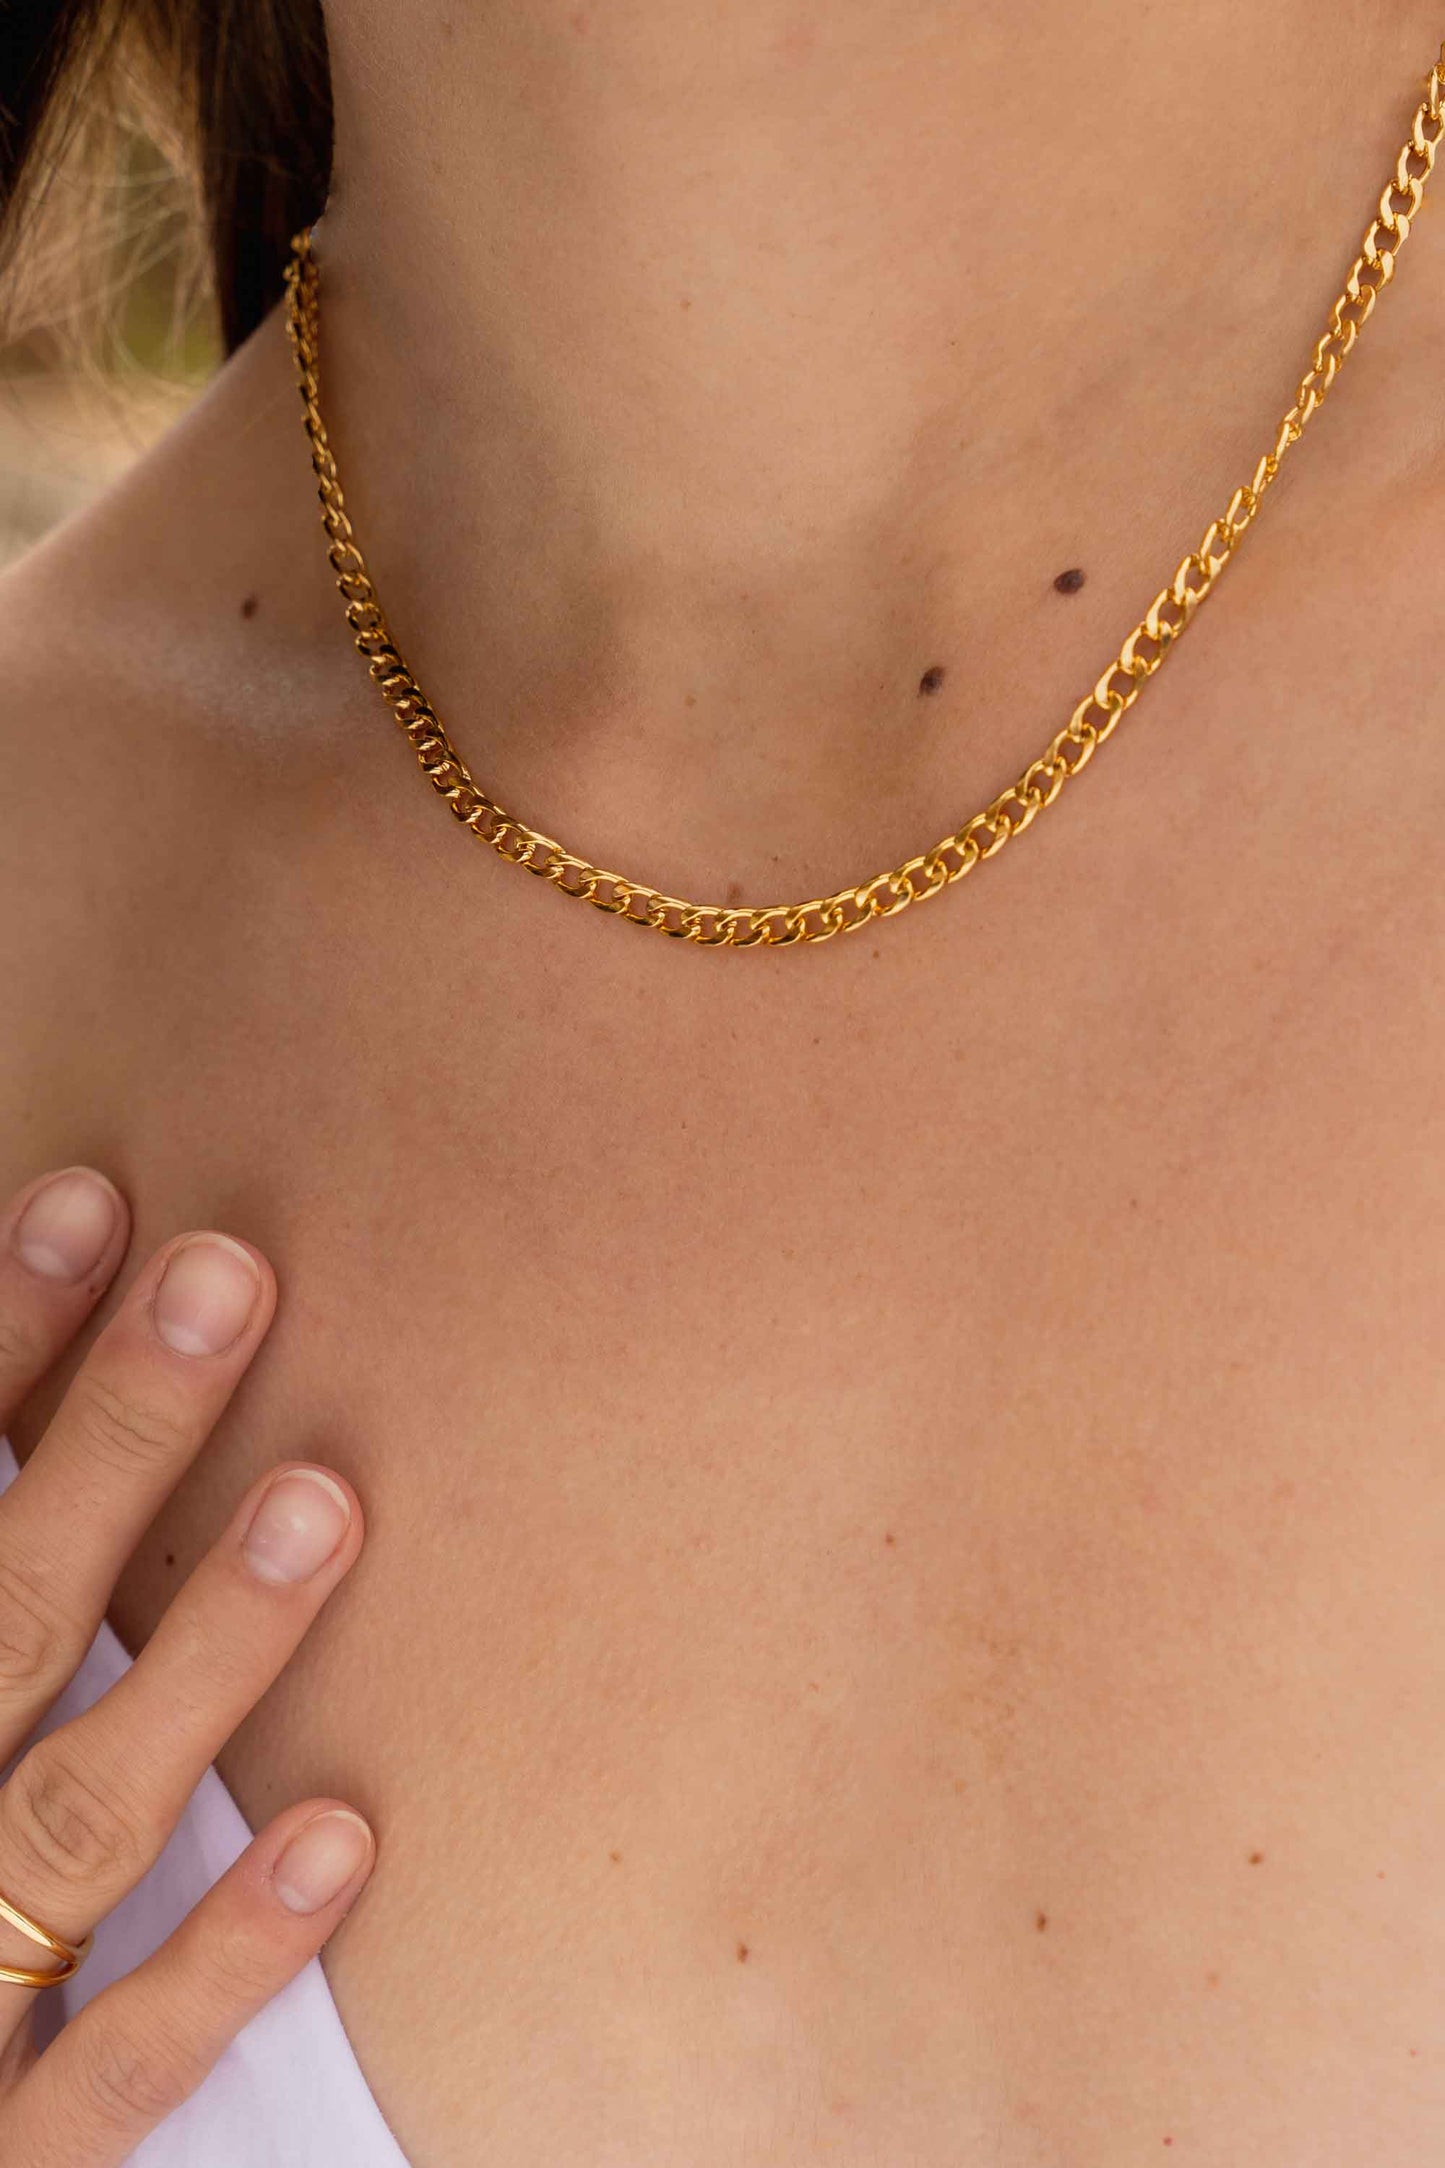 classic-vintage-style-gold-chain-necklace-curb-on-body-close